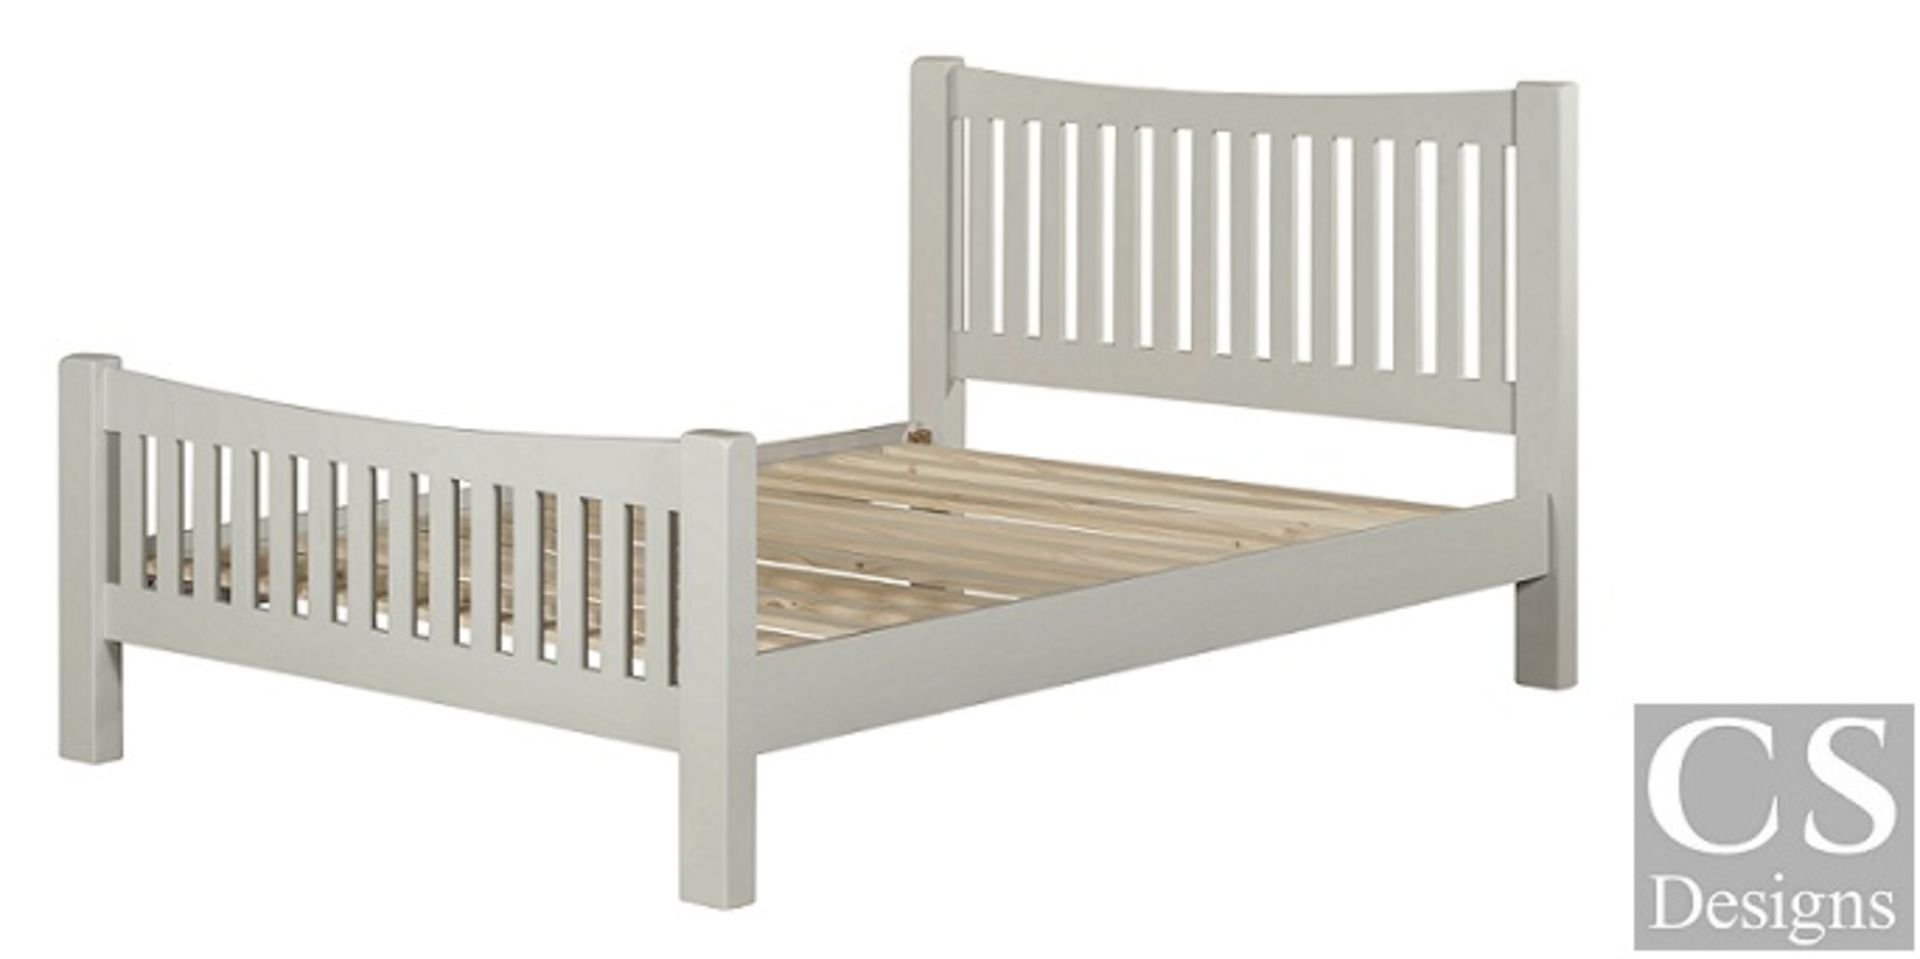 + VAT Brand New CS Designs "Daylesford" Double Bed Frame With Natural Oak & Solid Hardwood Painted